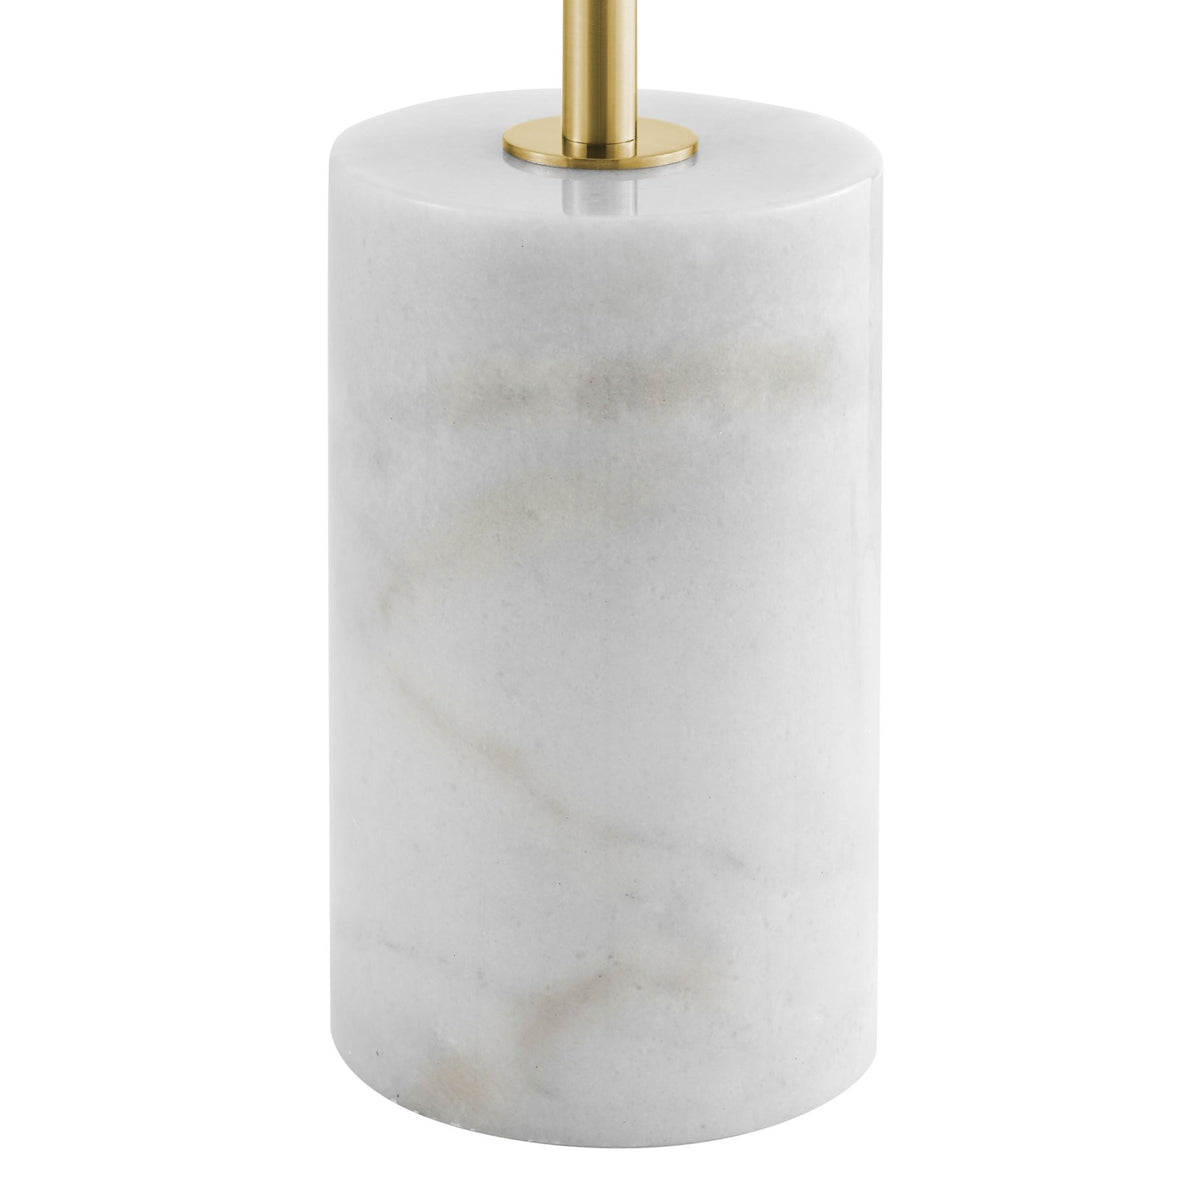 Finesse Decor Anechdoche Floor Lamp in Gold and White